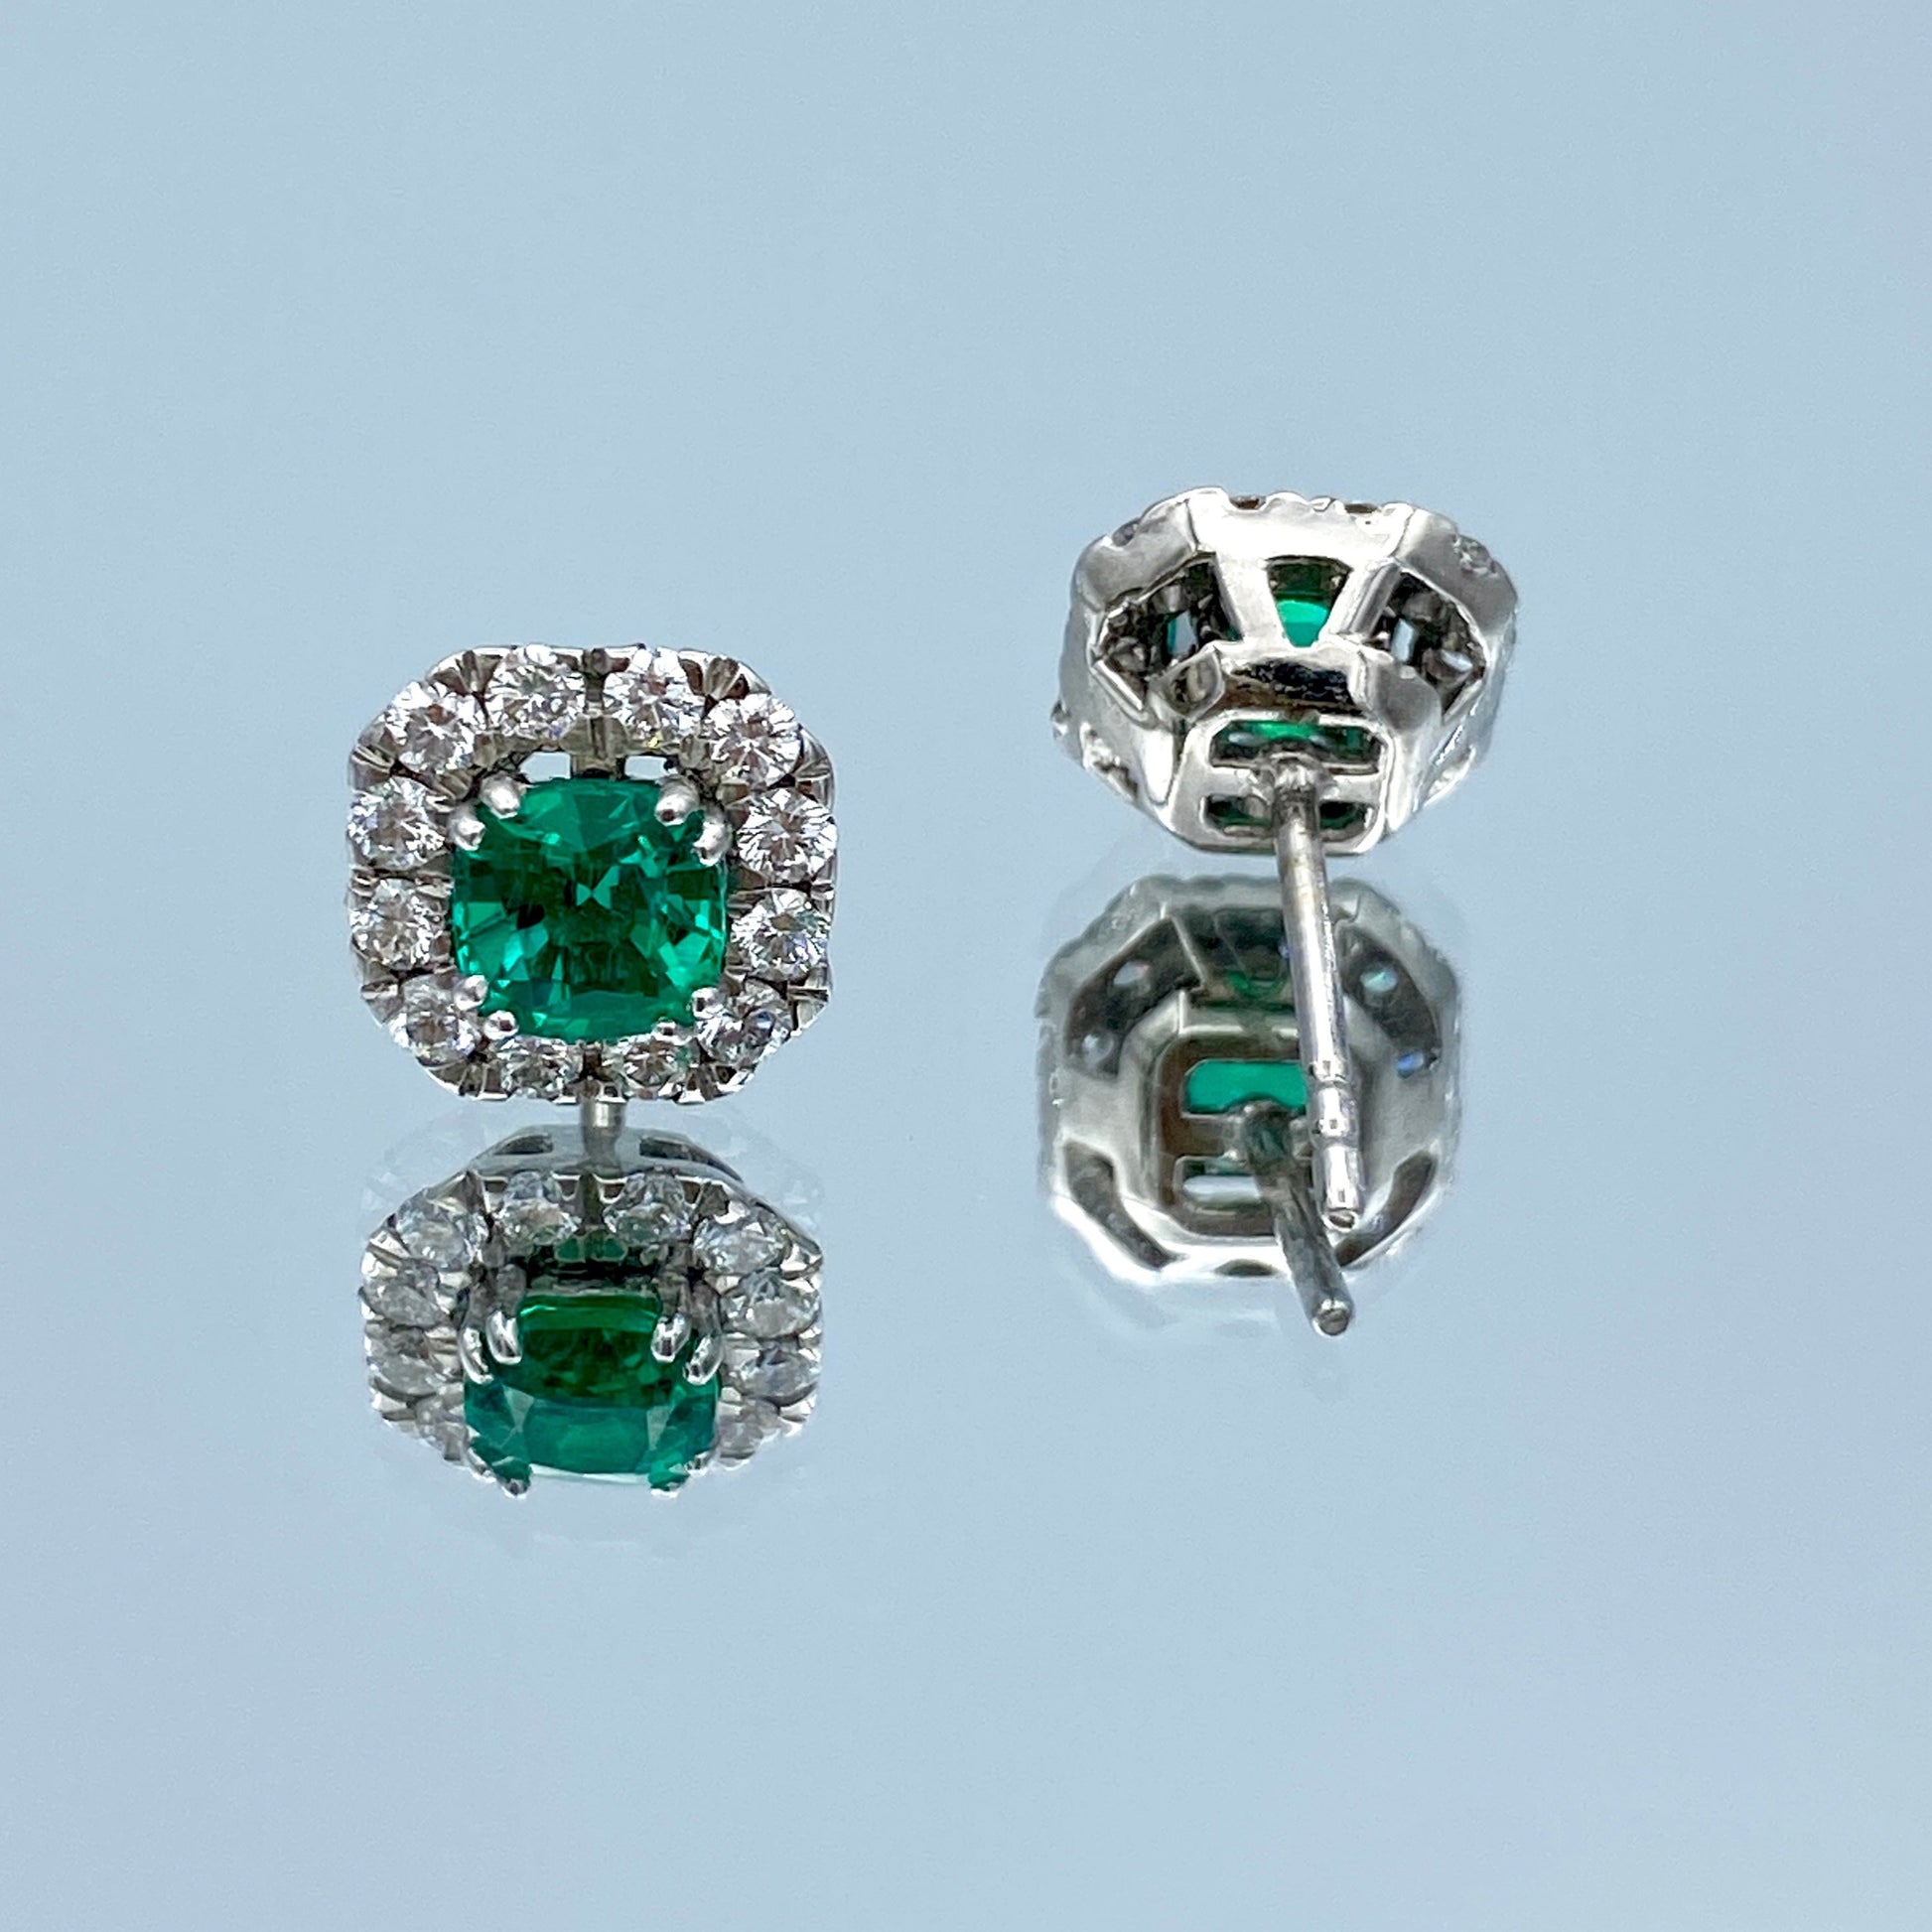 Emerald Earrings with a Diamond Halo in 14K White Gold - L and L Jewelry